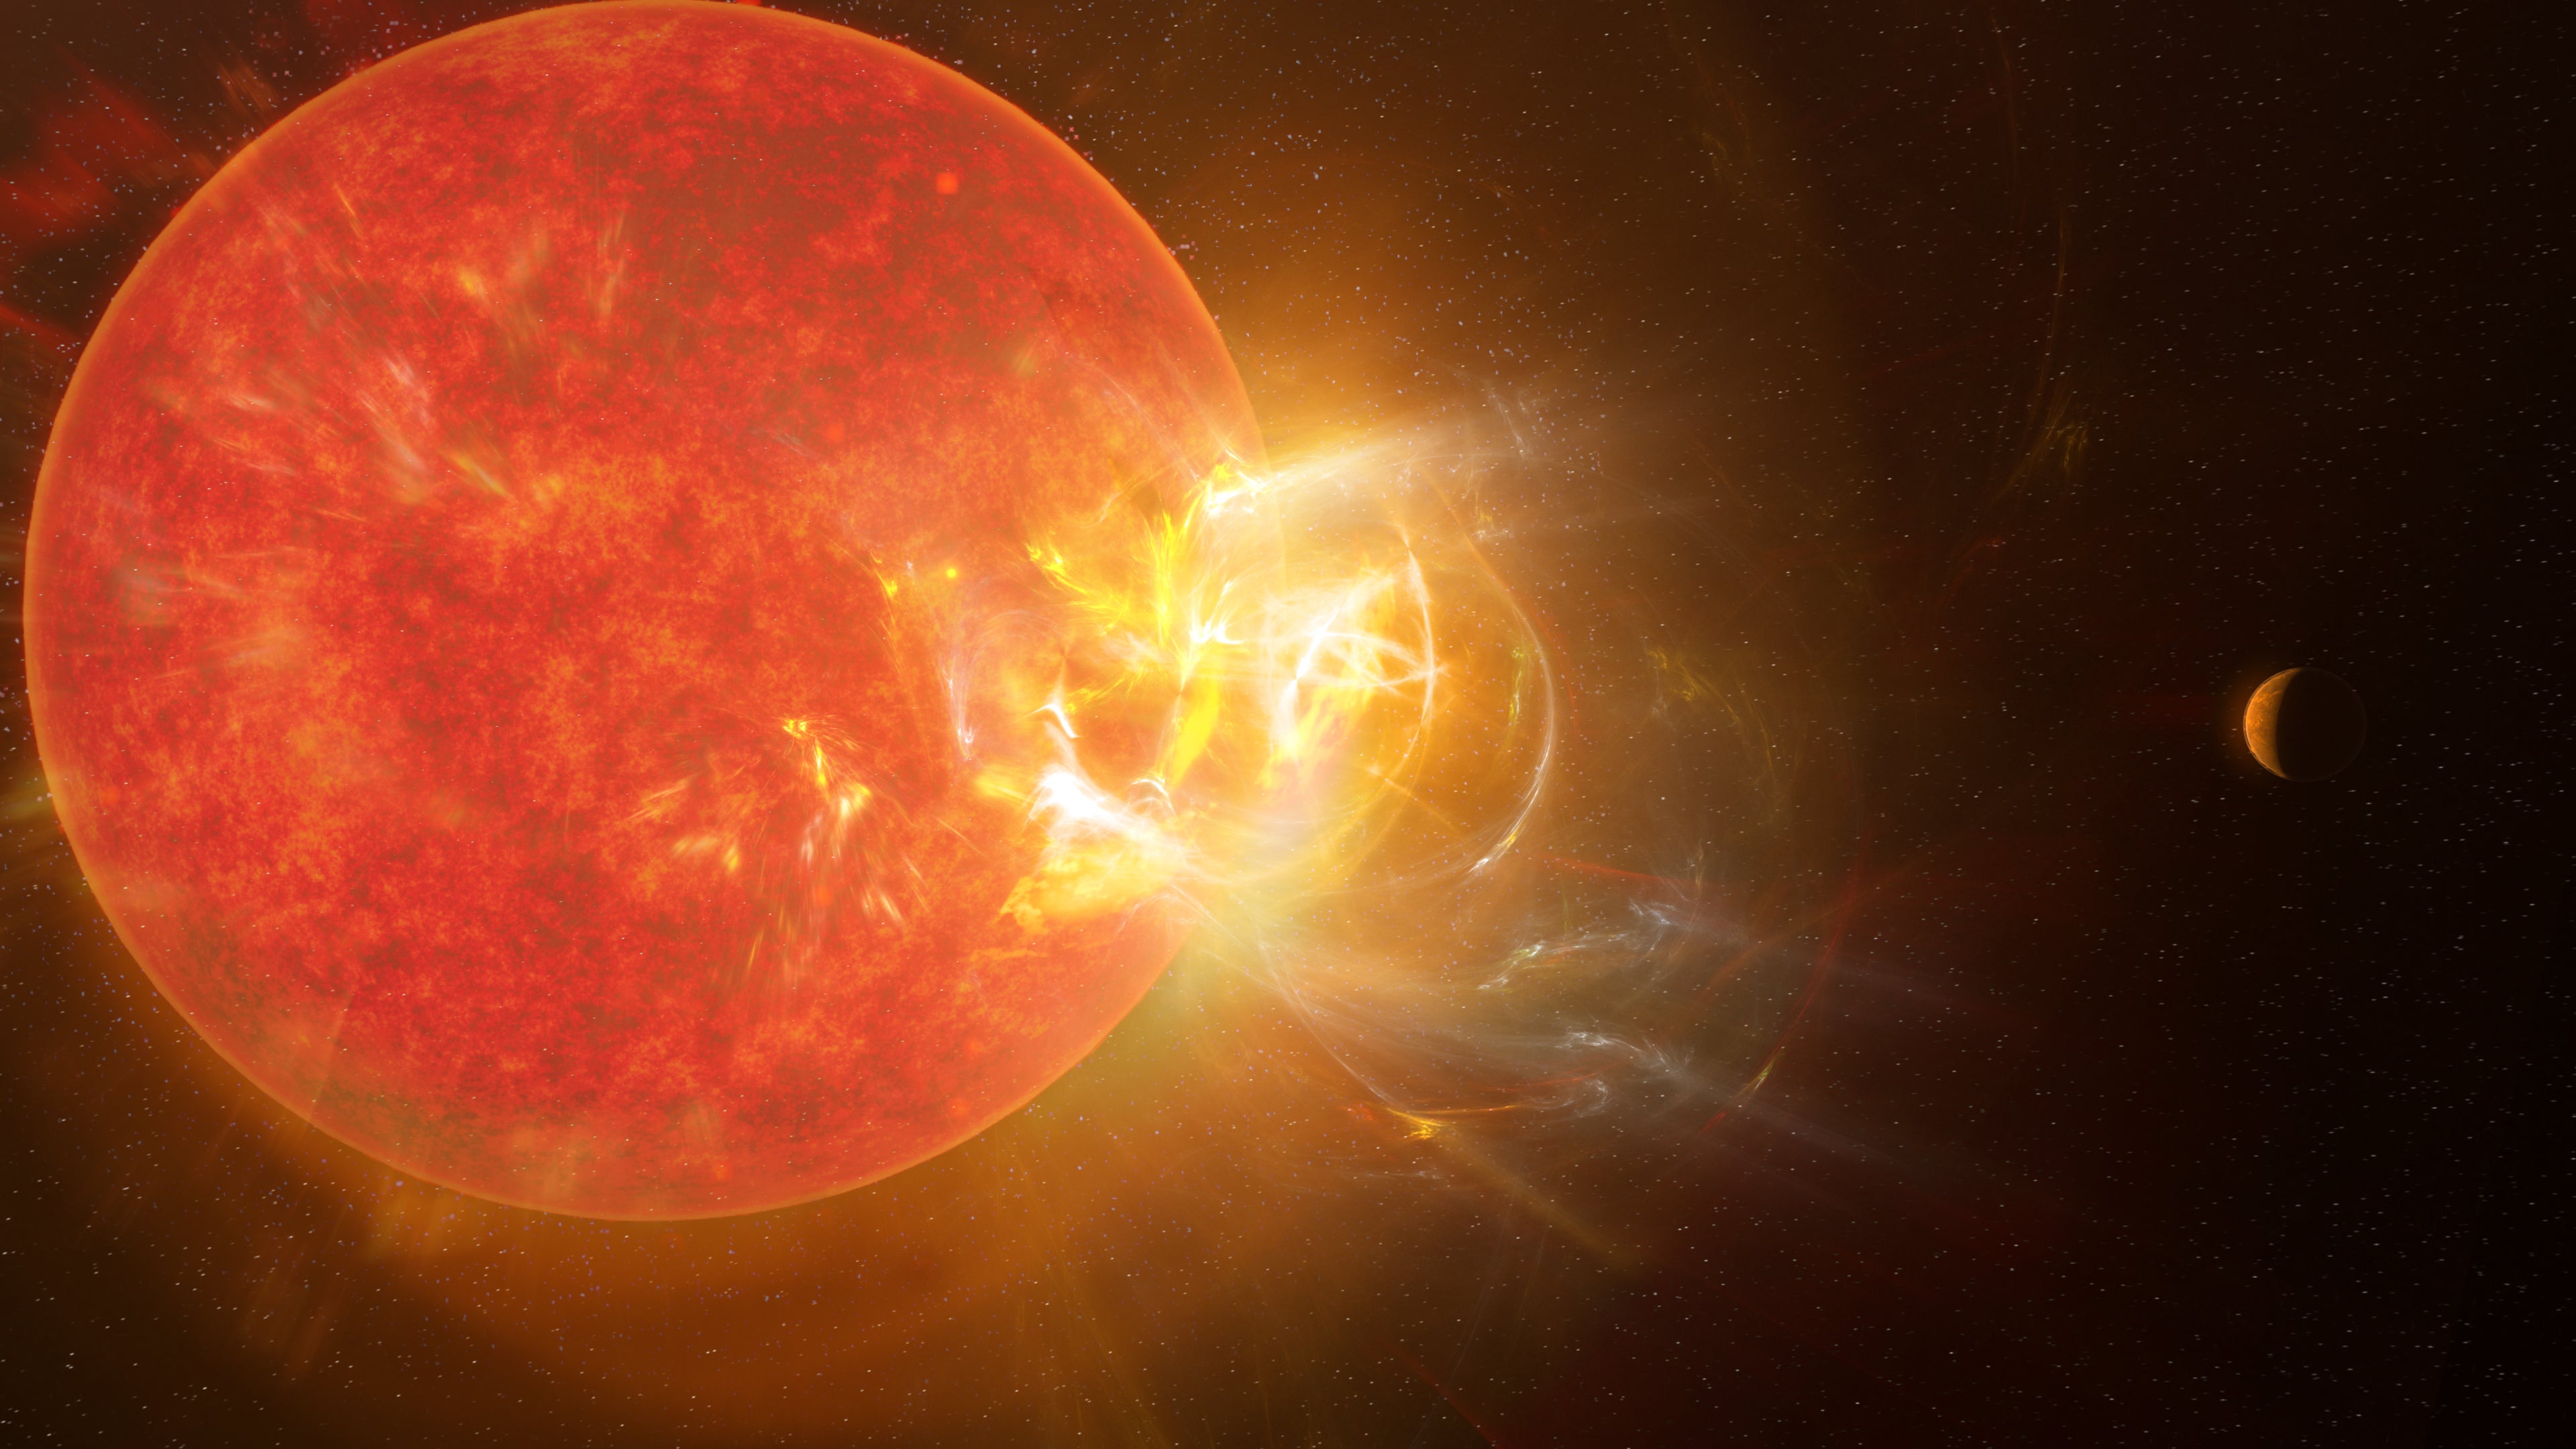 Artist's conception of the violent stellar flare from Proxima Centauri discovered by scientists in 2019 using nine telescopes across the electromagnetic spectrum, including the Atacama Large Millimeter/submillimeter Array (ALMA)